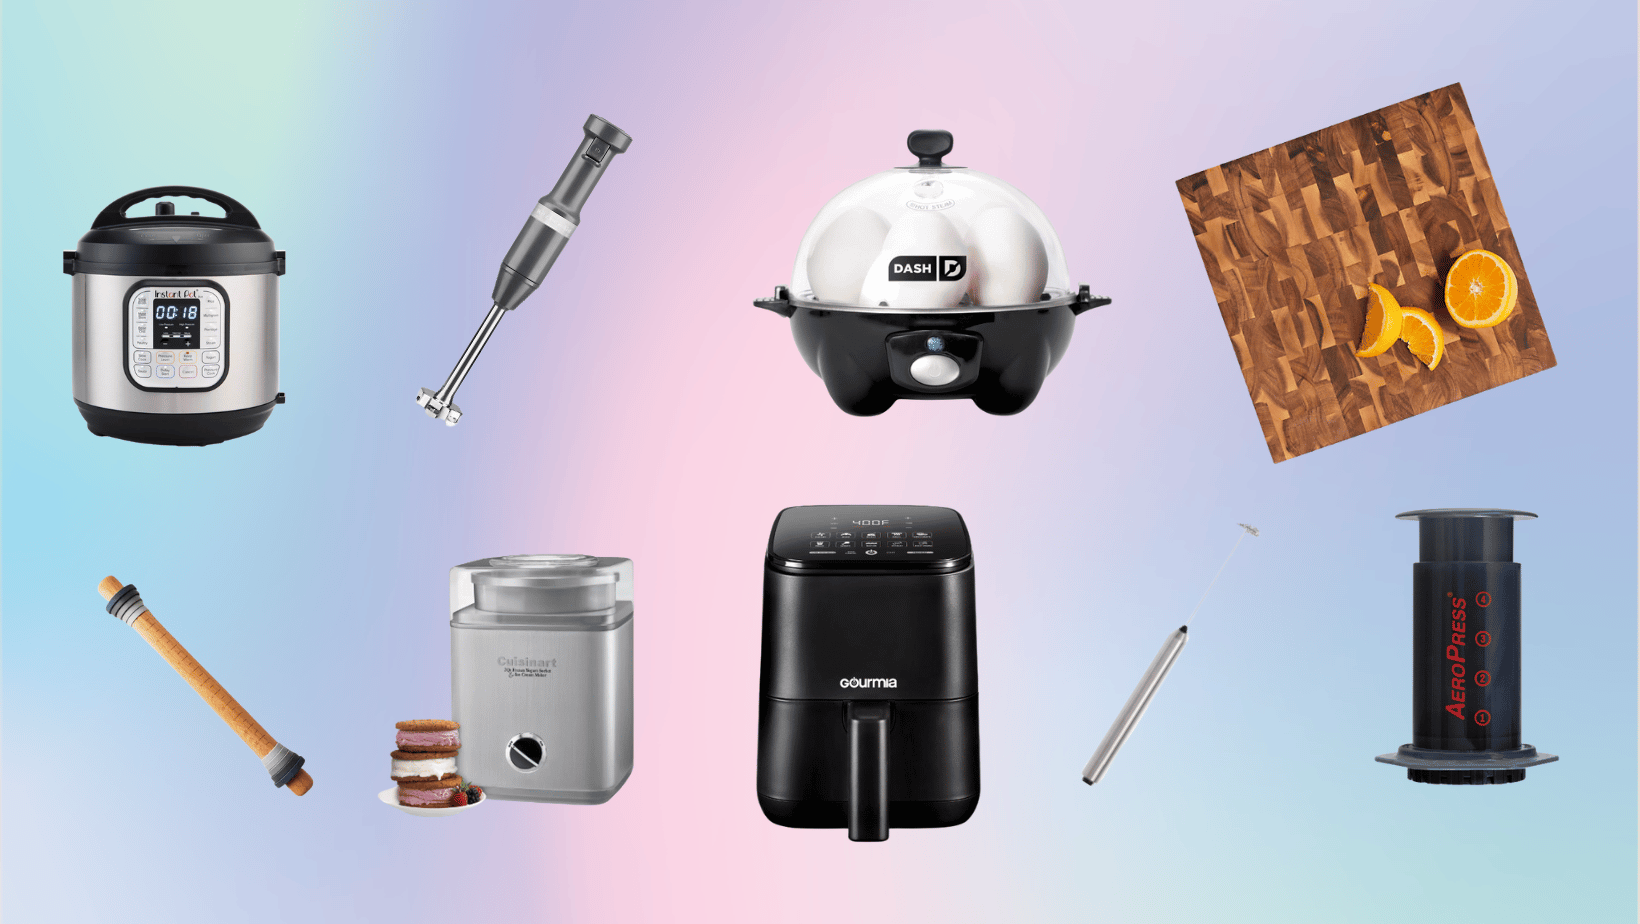 The Best Home and Kitchen Gifts